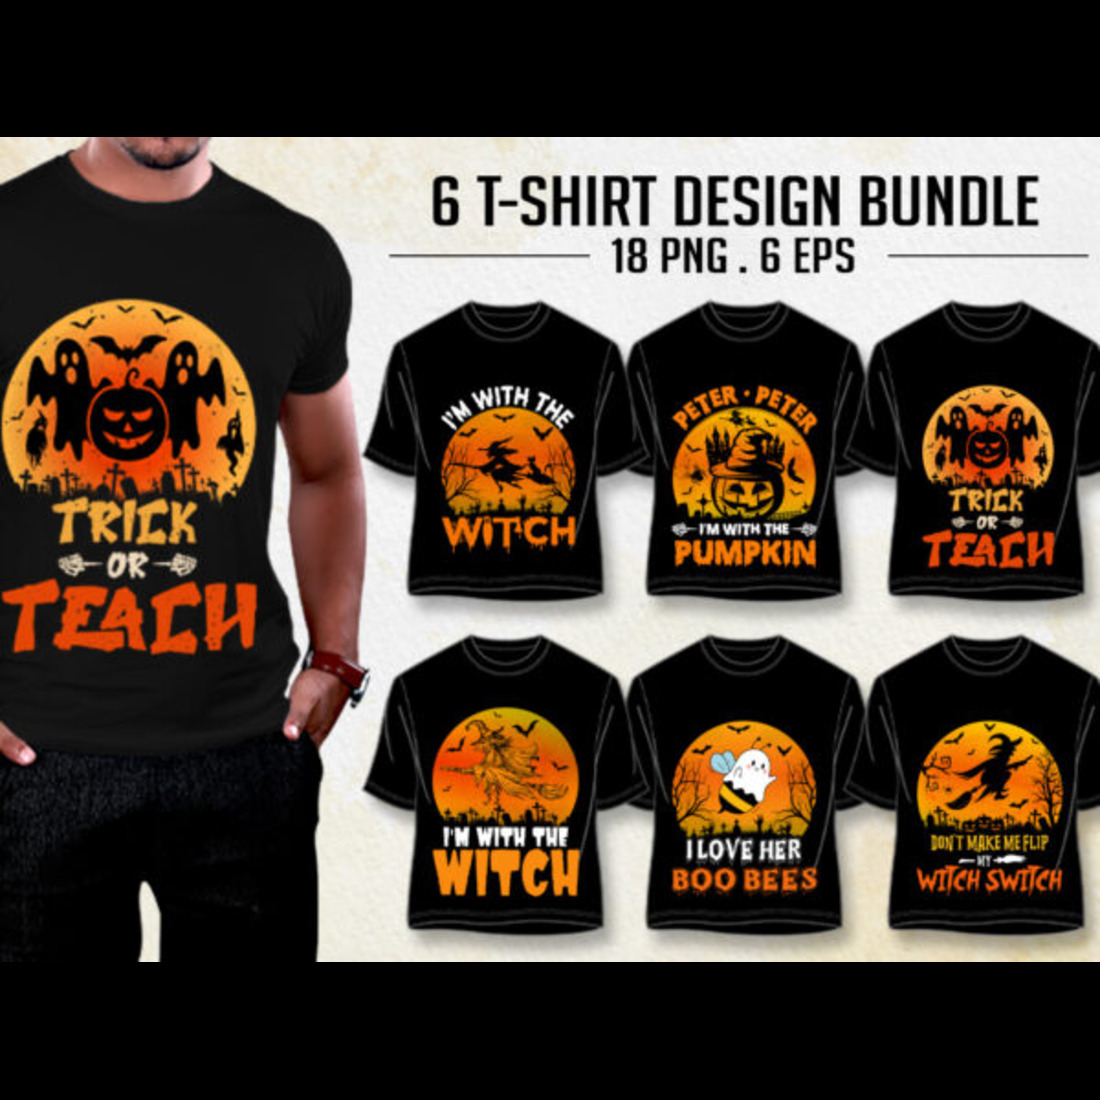 Tow Helloween T Shirt Desgin JPG and PNG preview image.